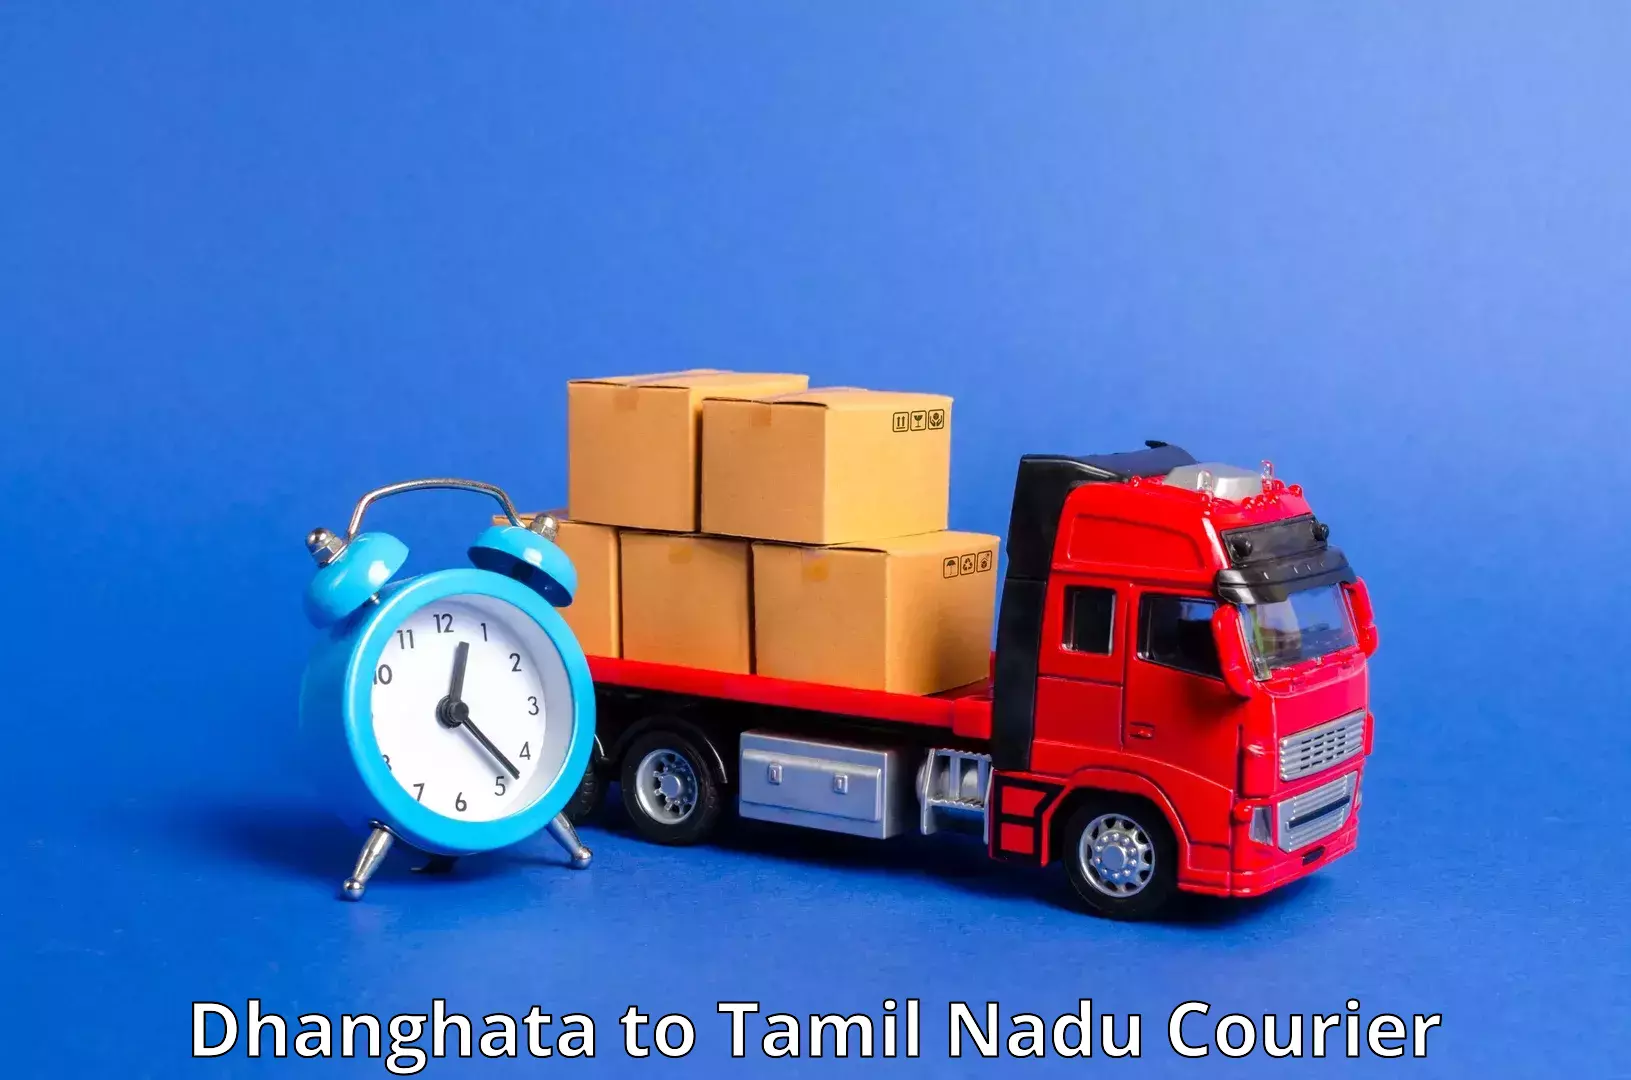 Reliable courier service Dhanghata to Coimbatore